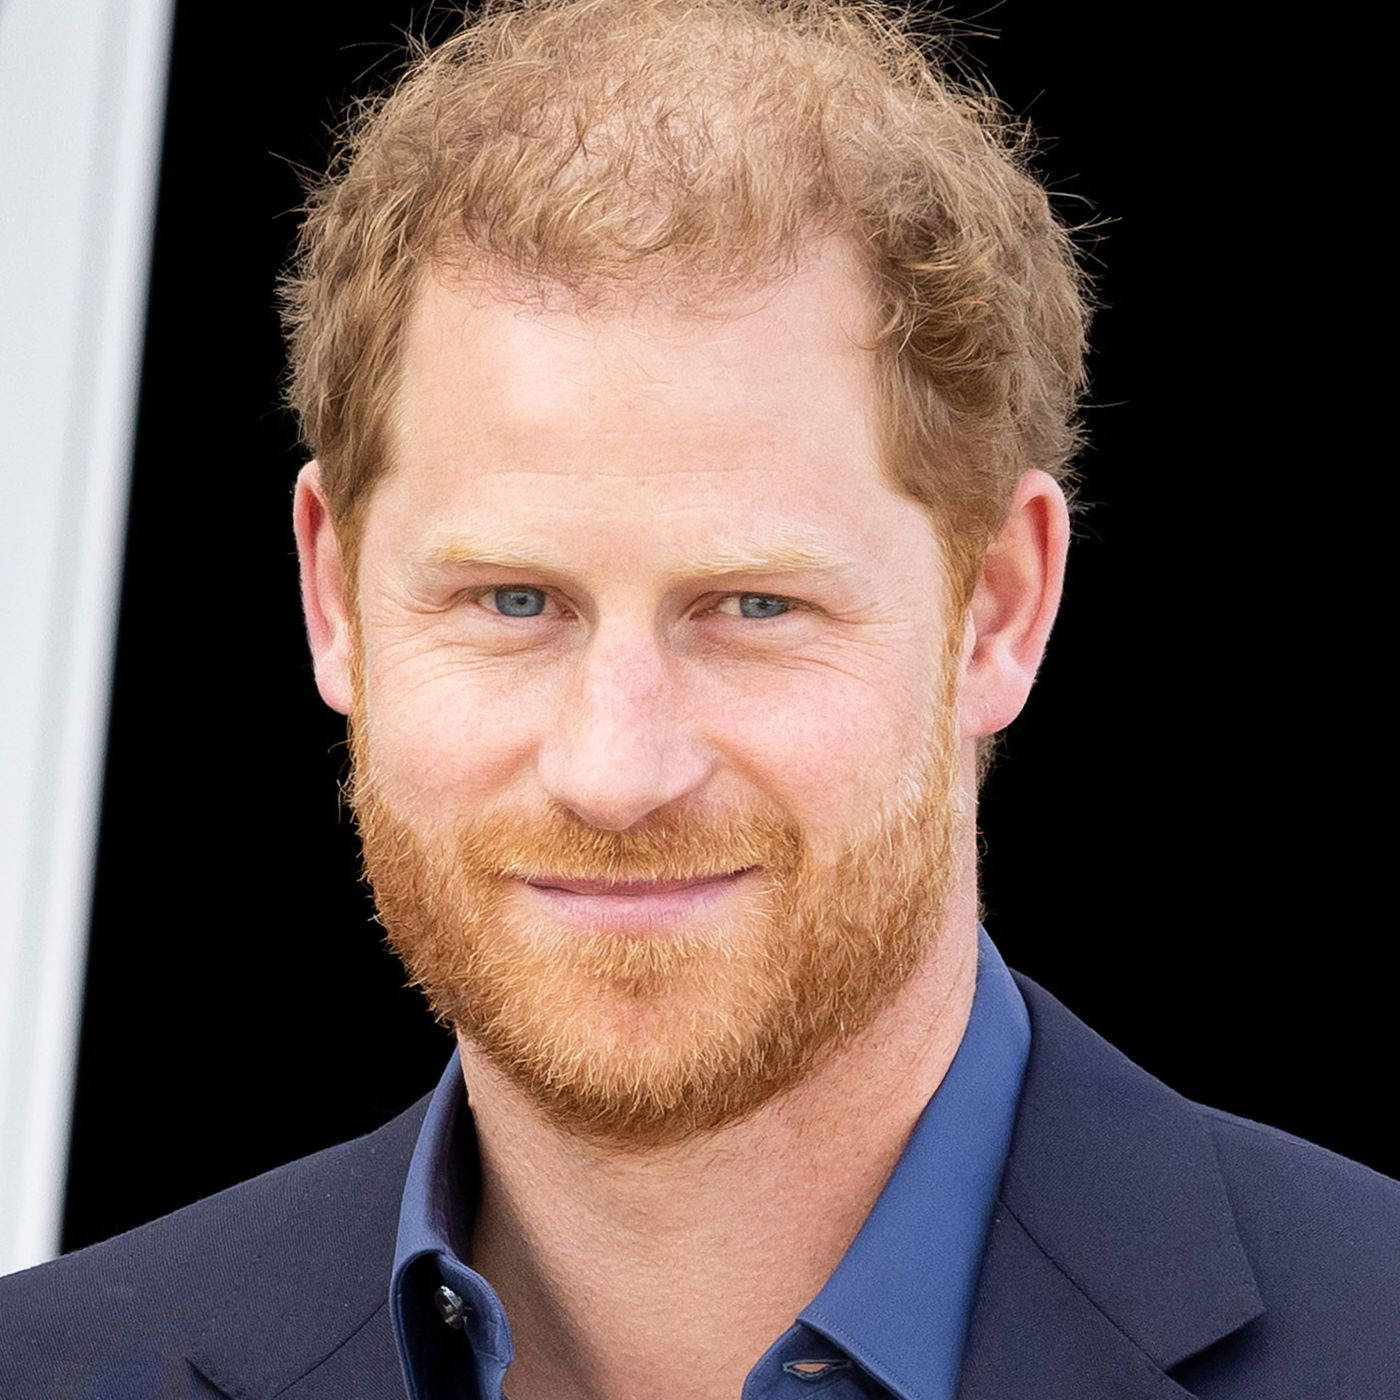 A Genuine And Heartwarming Smile From Prince Harry